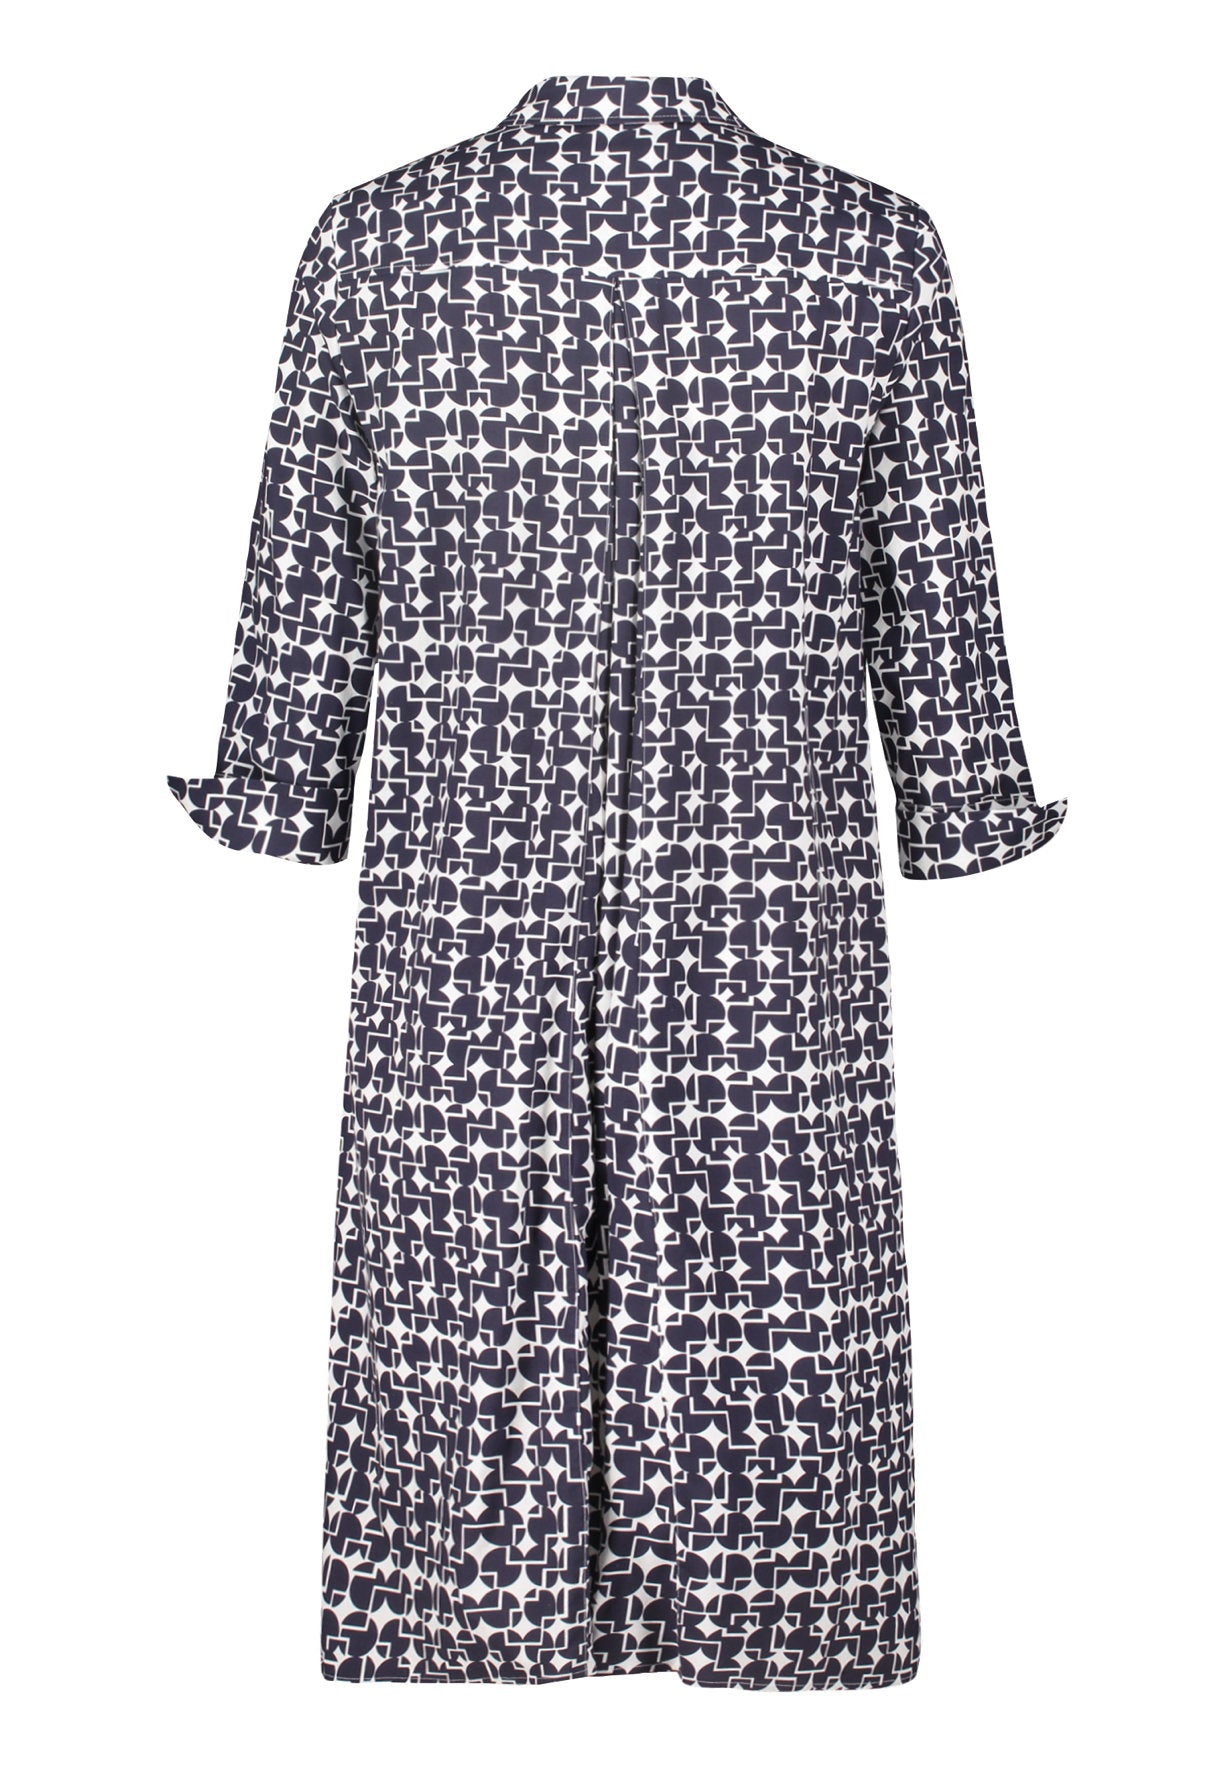 Shirt Dress With All Over Print_6574 4175_1882_09